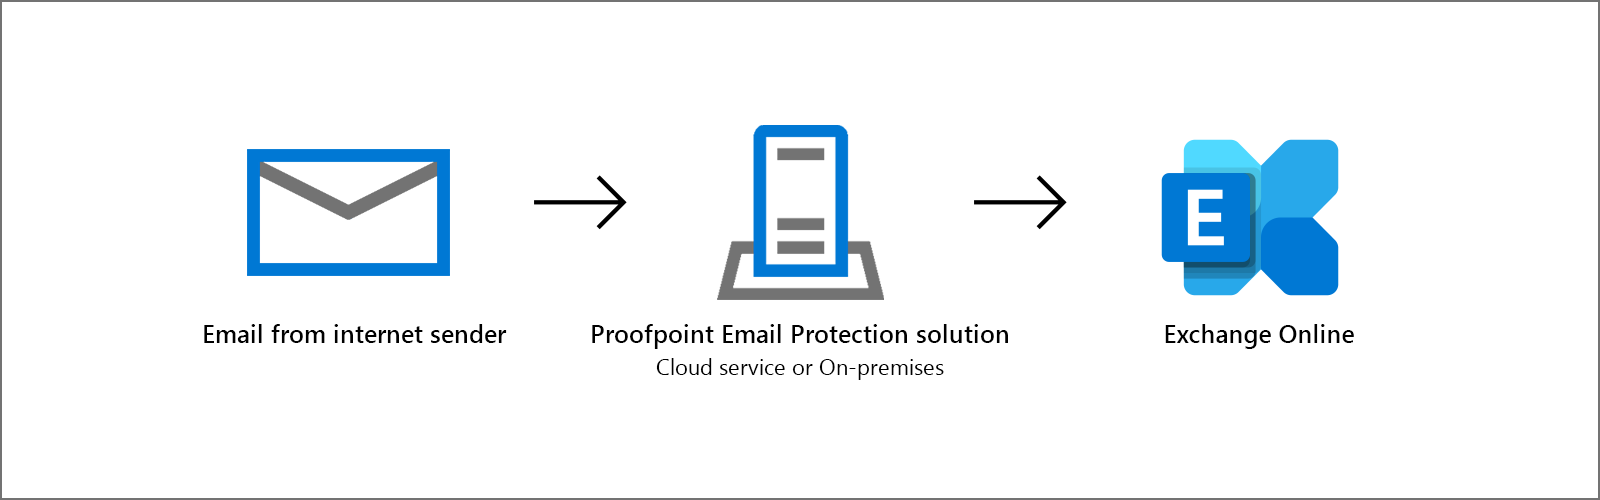 Configurer Proofpoint Email Protection avec Exchange Online - Exchange |  Microsoft Learn